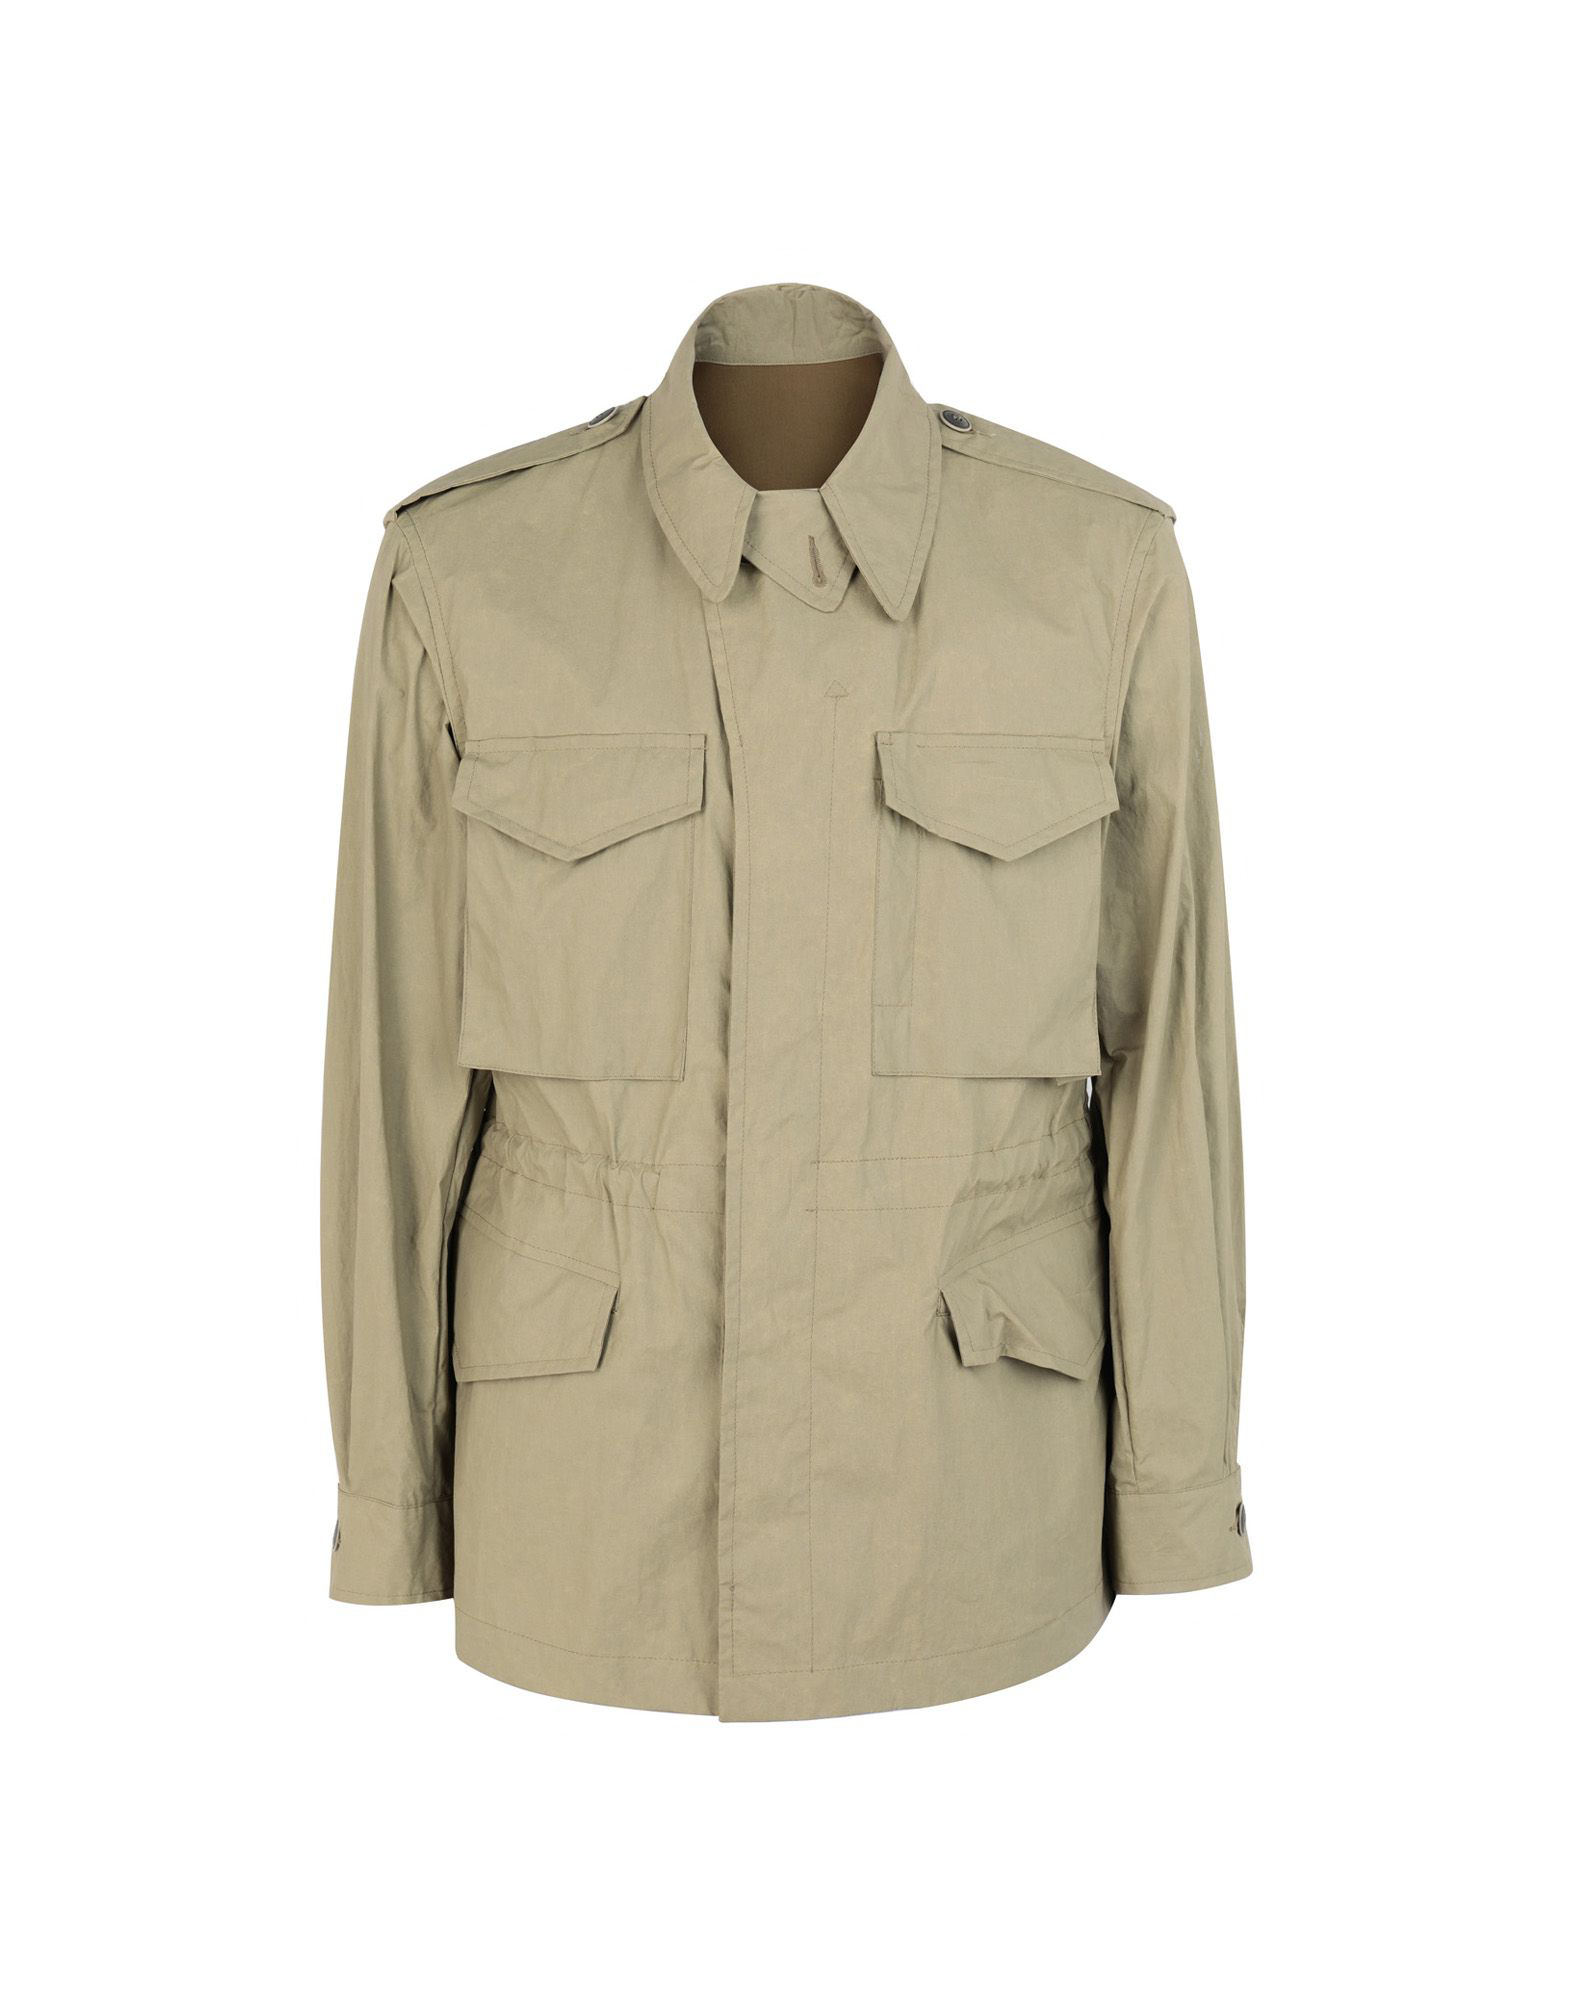 East Harbour Surplus Jacket In Military Green | ModeSens